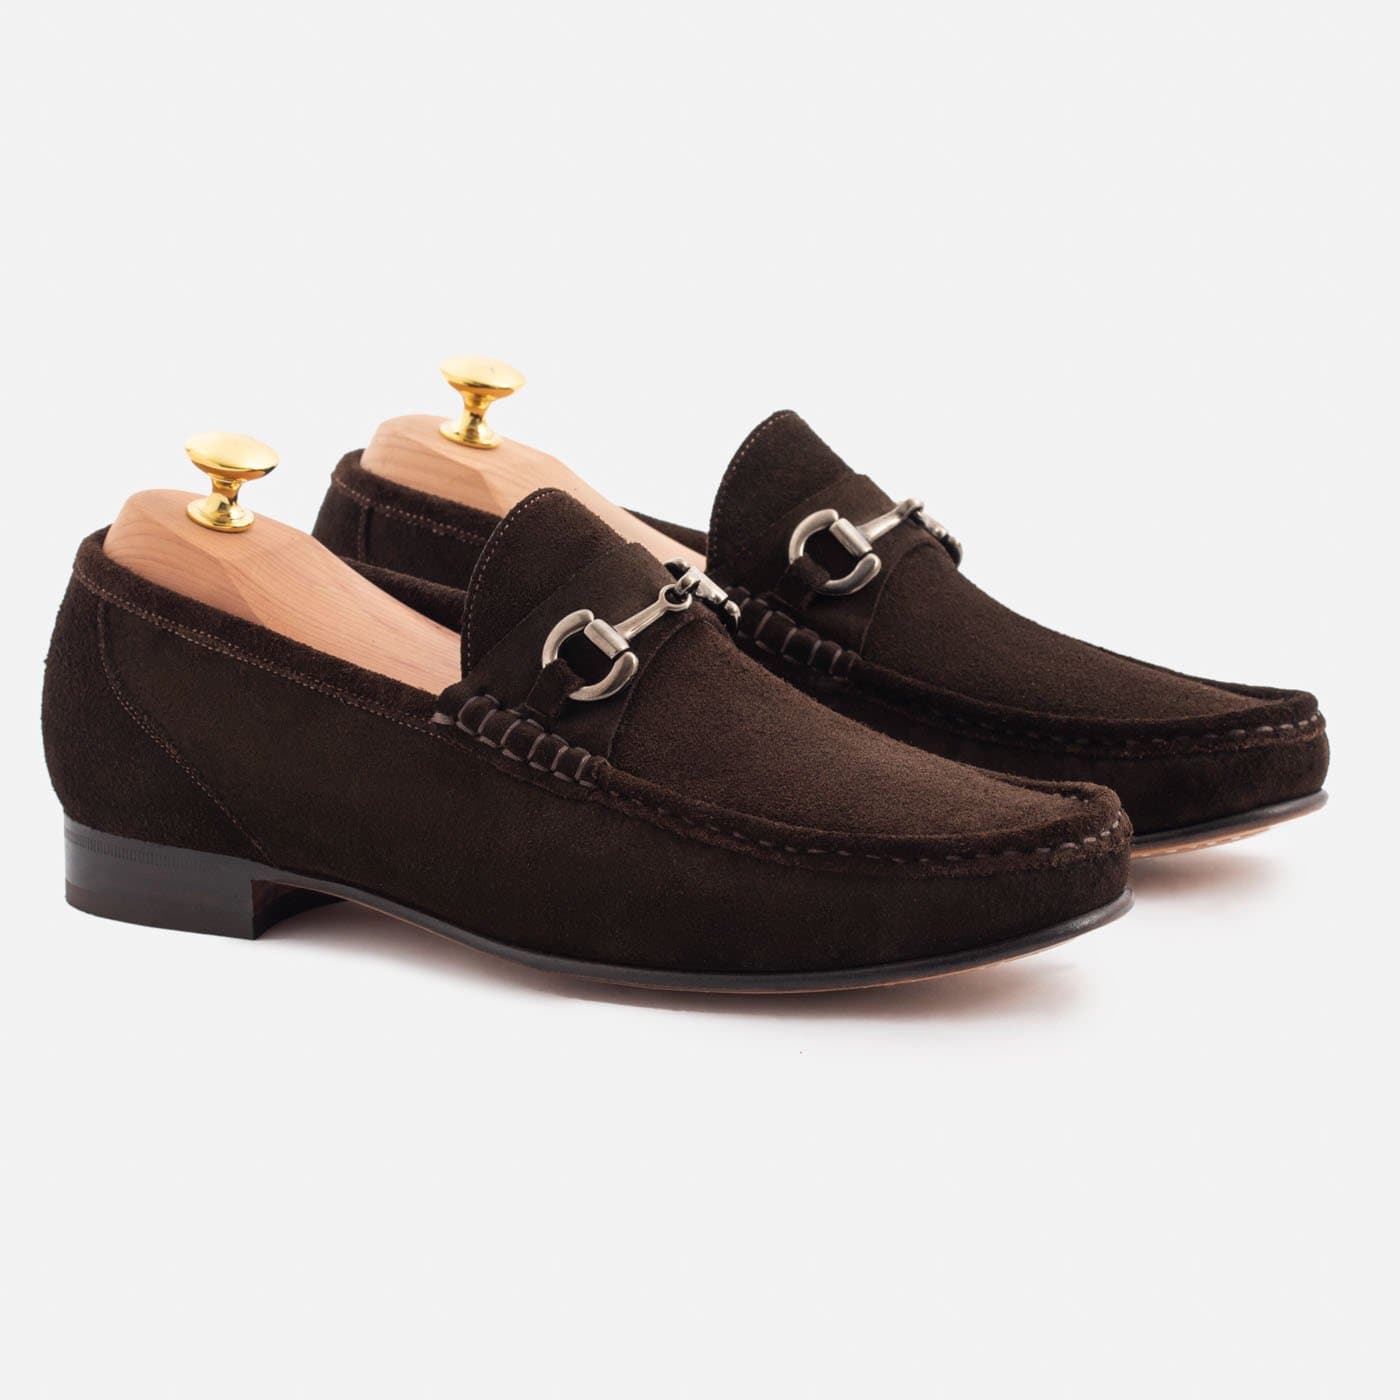 Beaumont Loafers - Suede - Men's